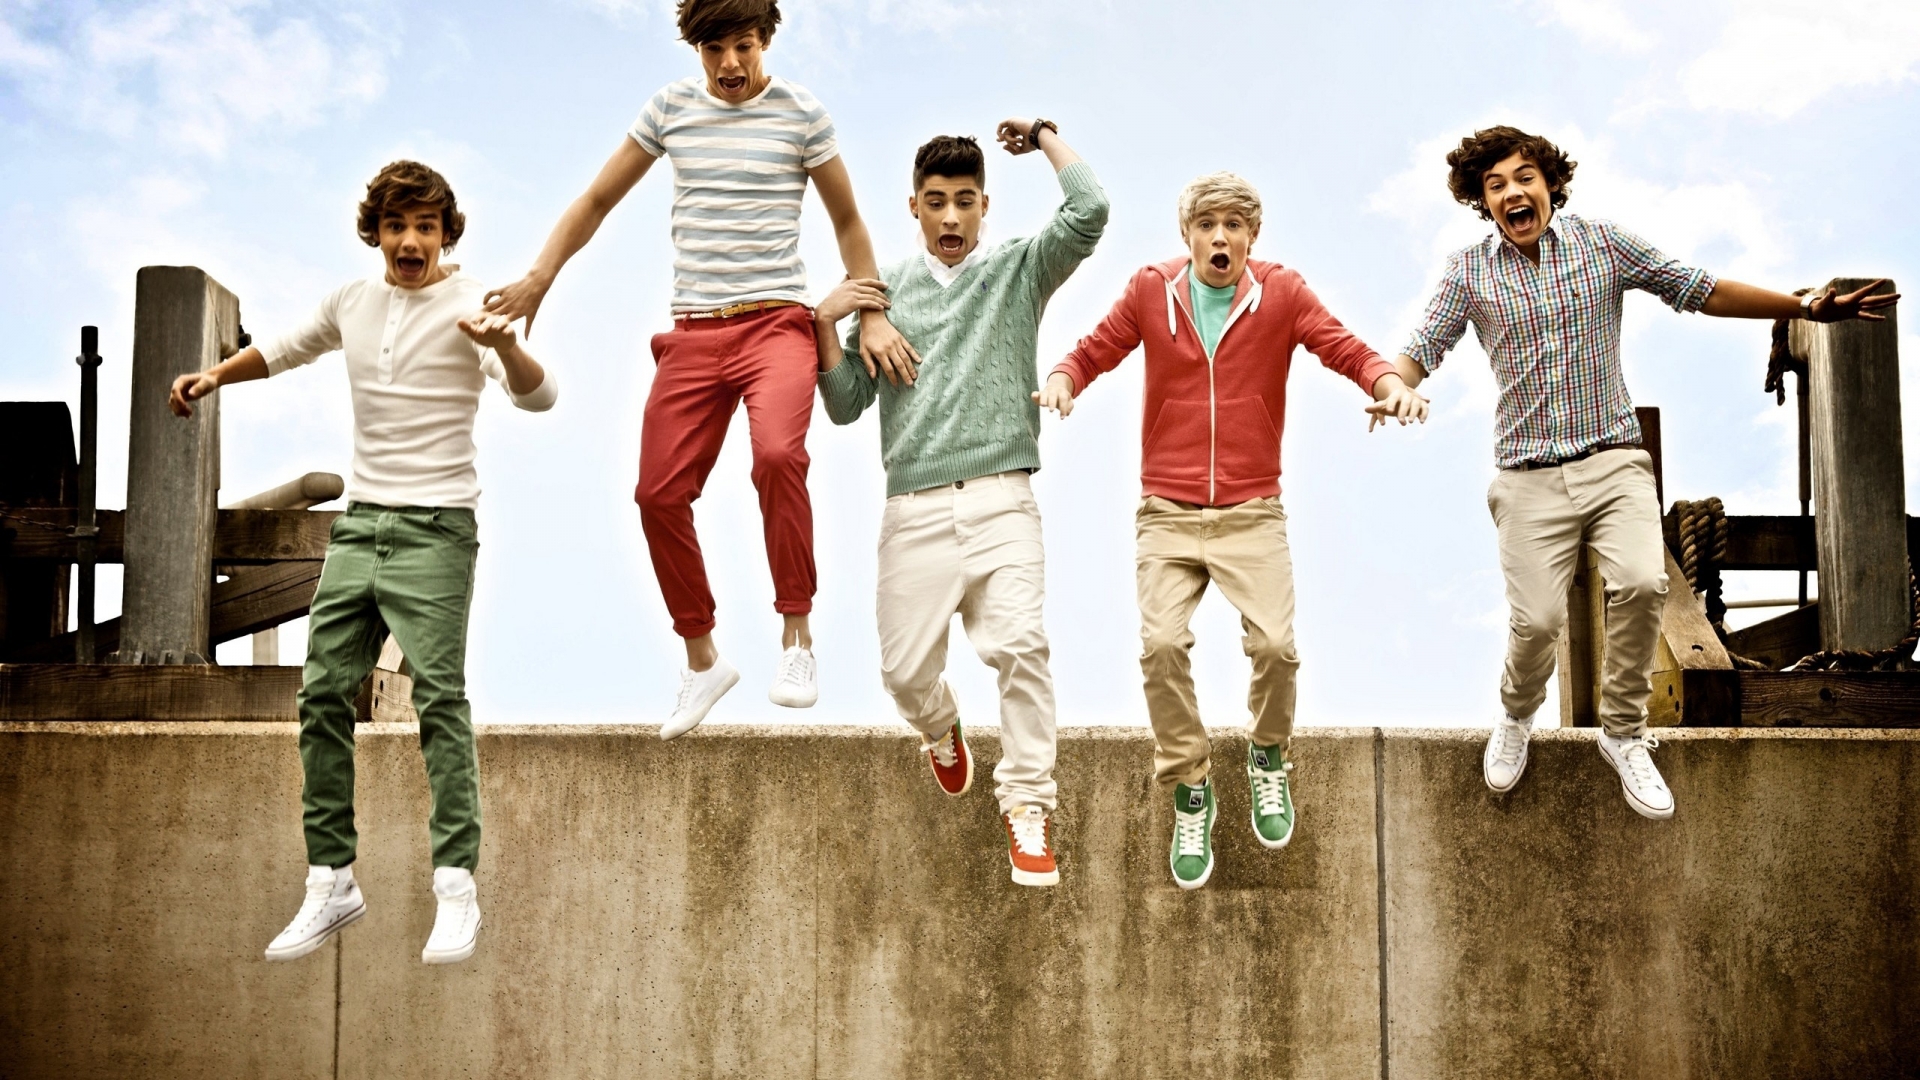 One Direction Jumping for 1920 x 1080 HDTV 1080p resolution